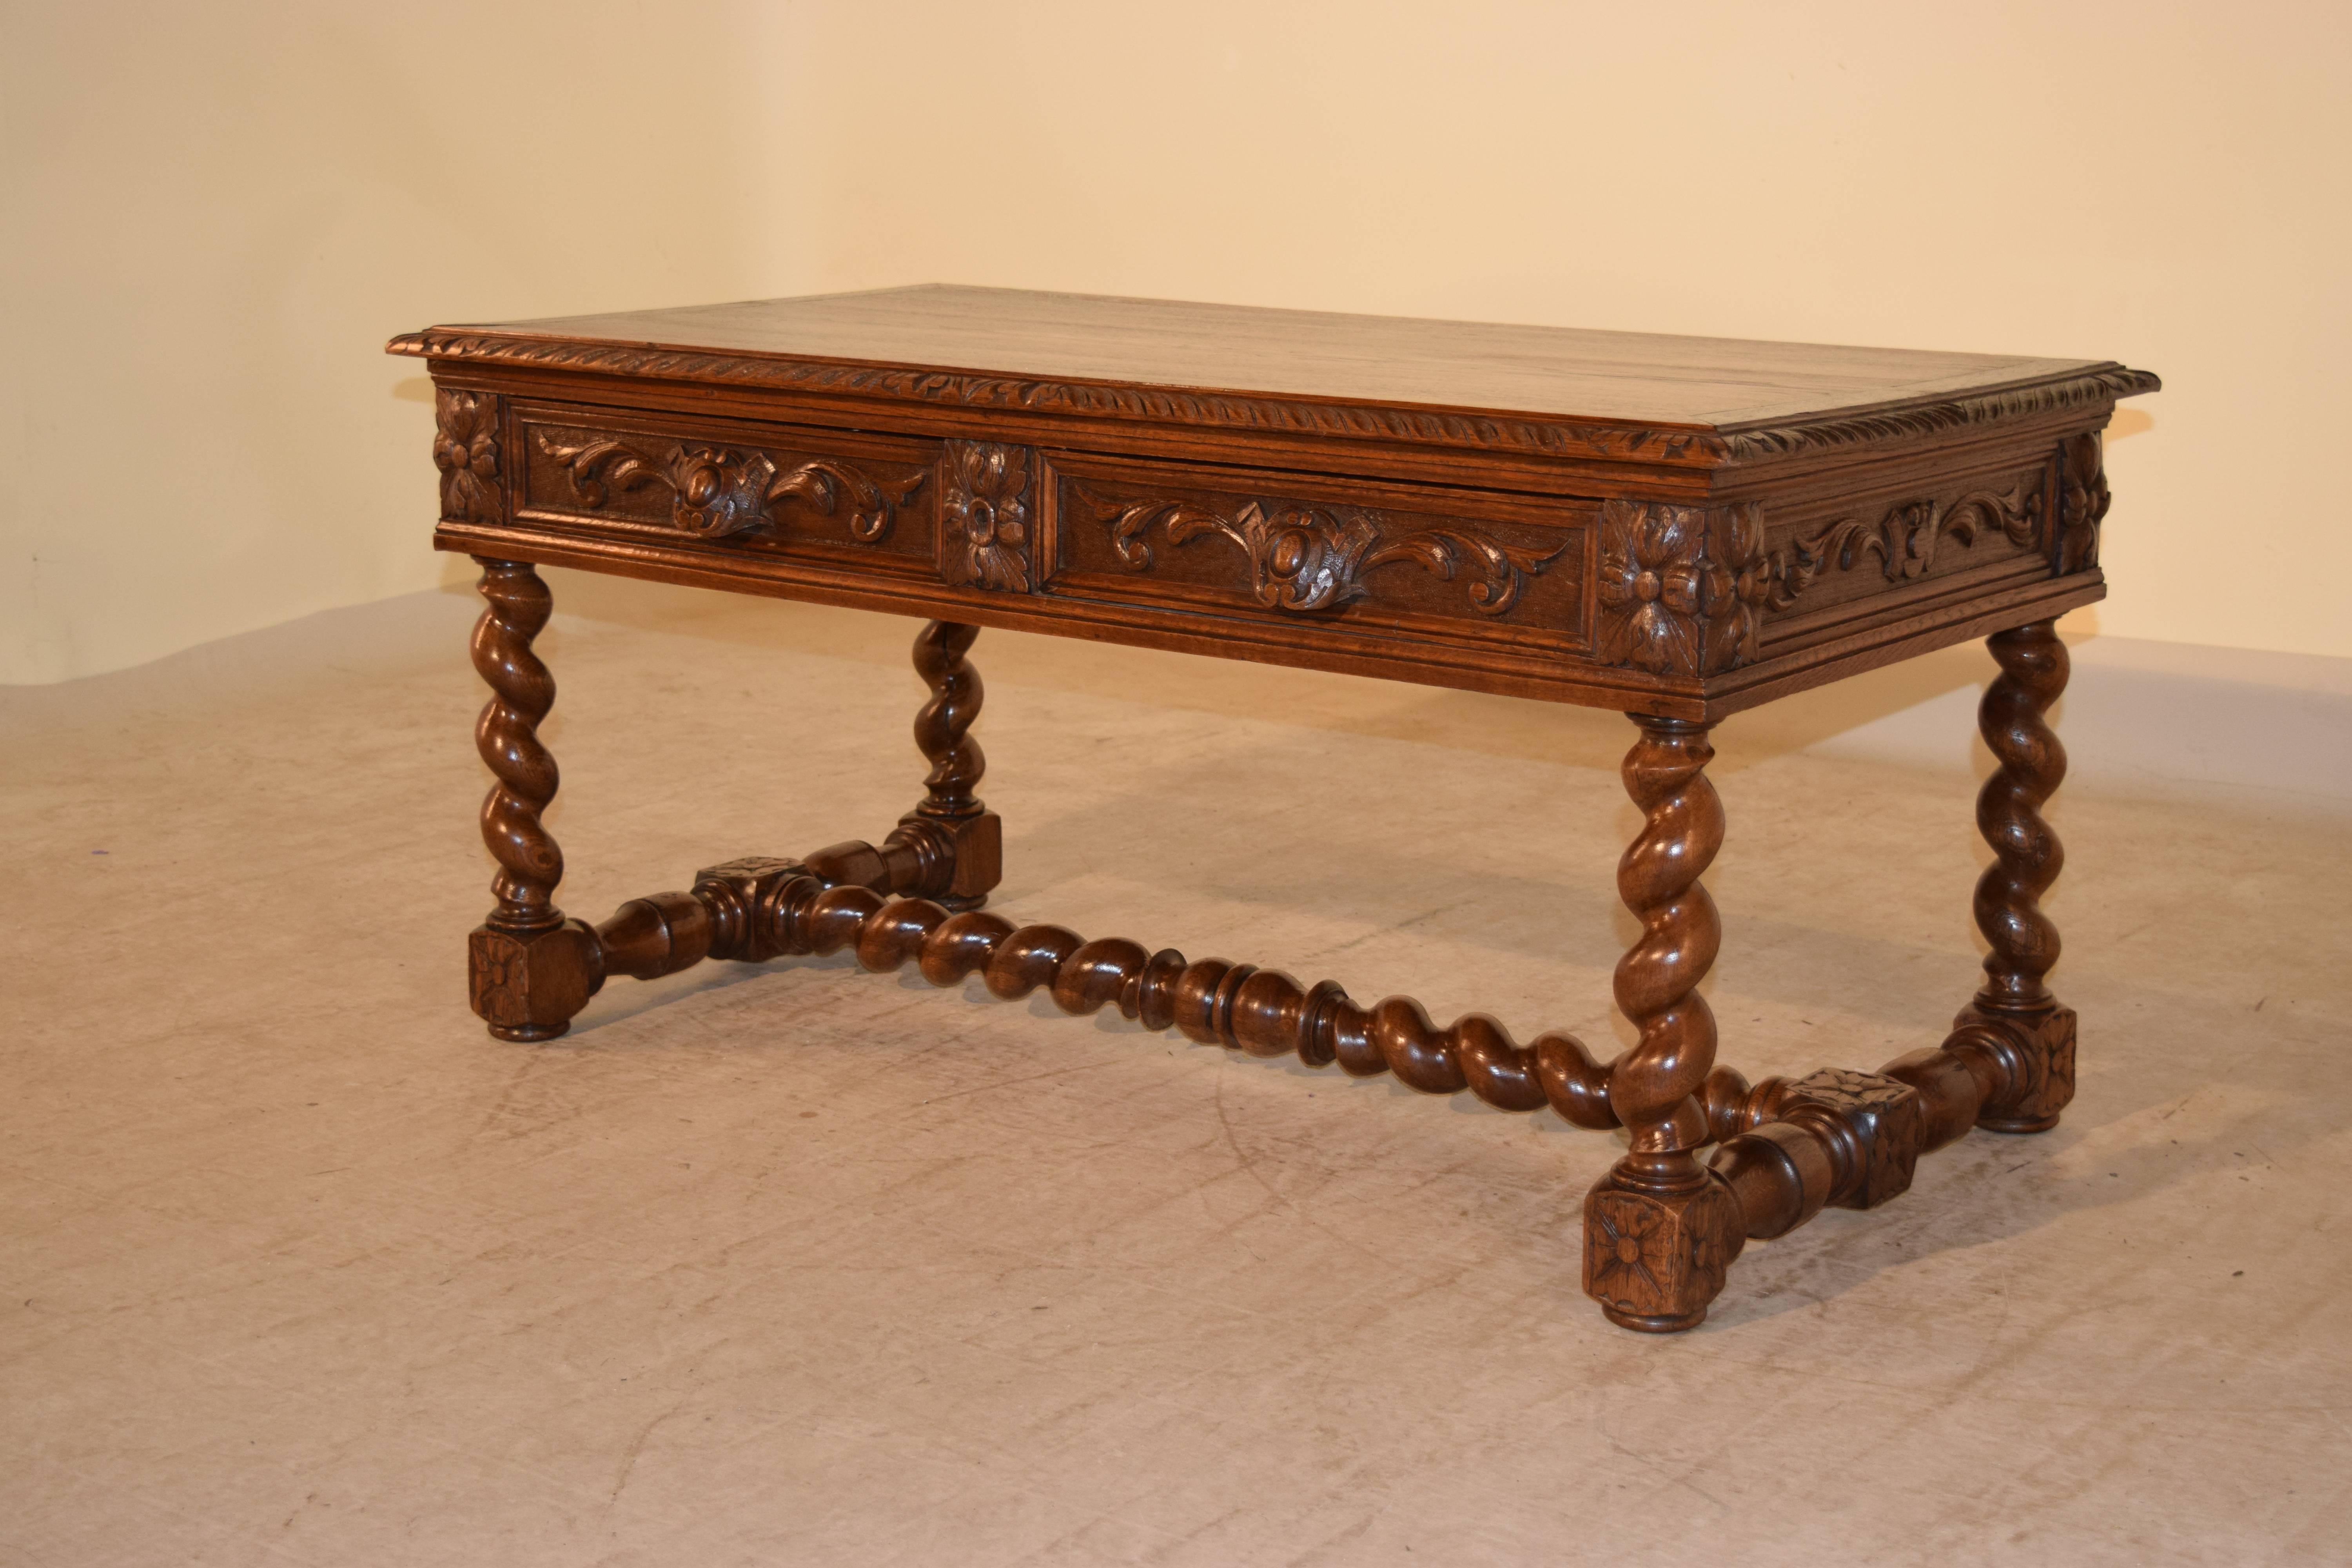 19th century French coffee table made from oak. The top is banded and has a beveled and gadrooned edge, following down to a carved decorated apron with two drawers on the front and supported on hand-turned barley twist legs, joined by barley twist